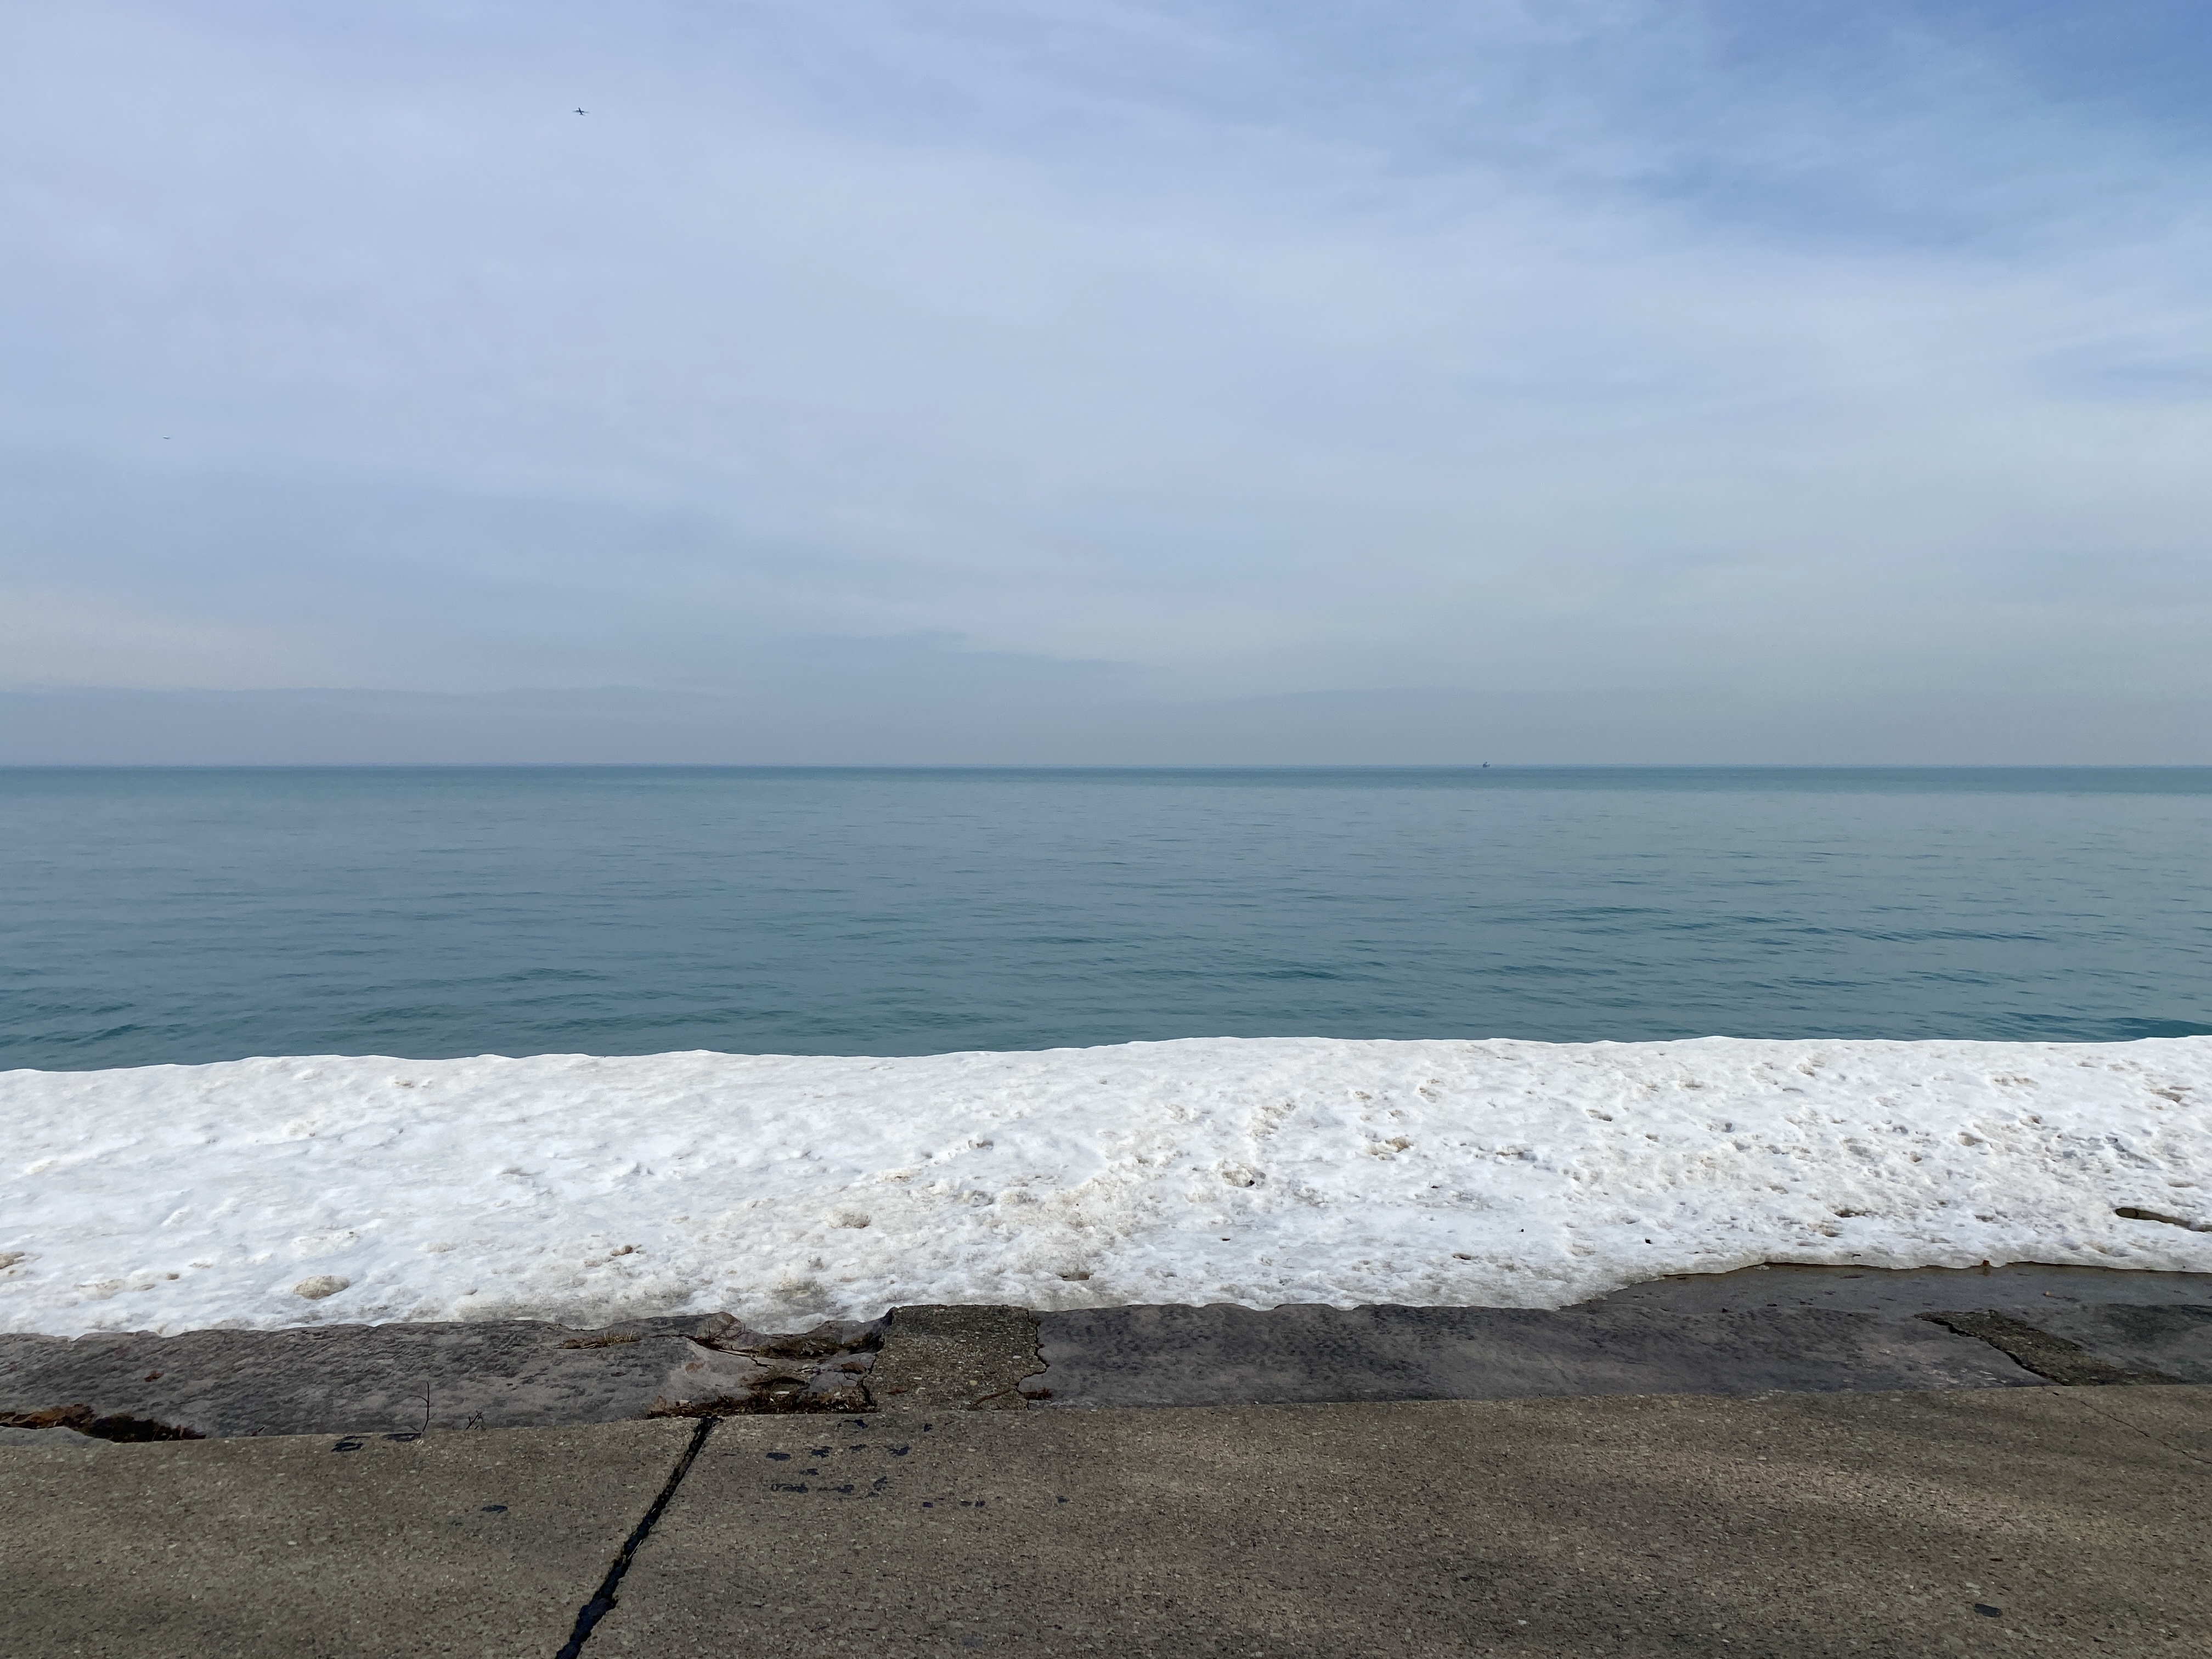 Horizon of large Lake Michigan with cloud-swept pale blue sky and a shelf of snow in the foreground